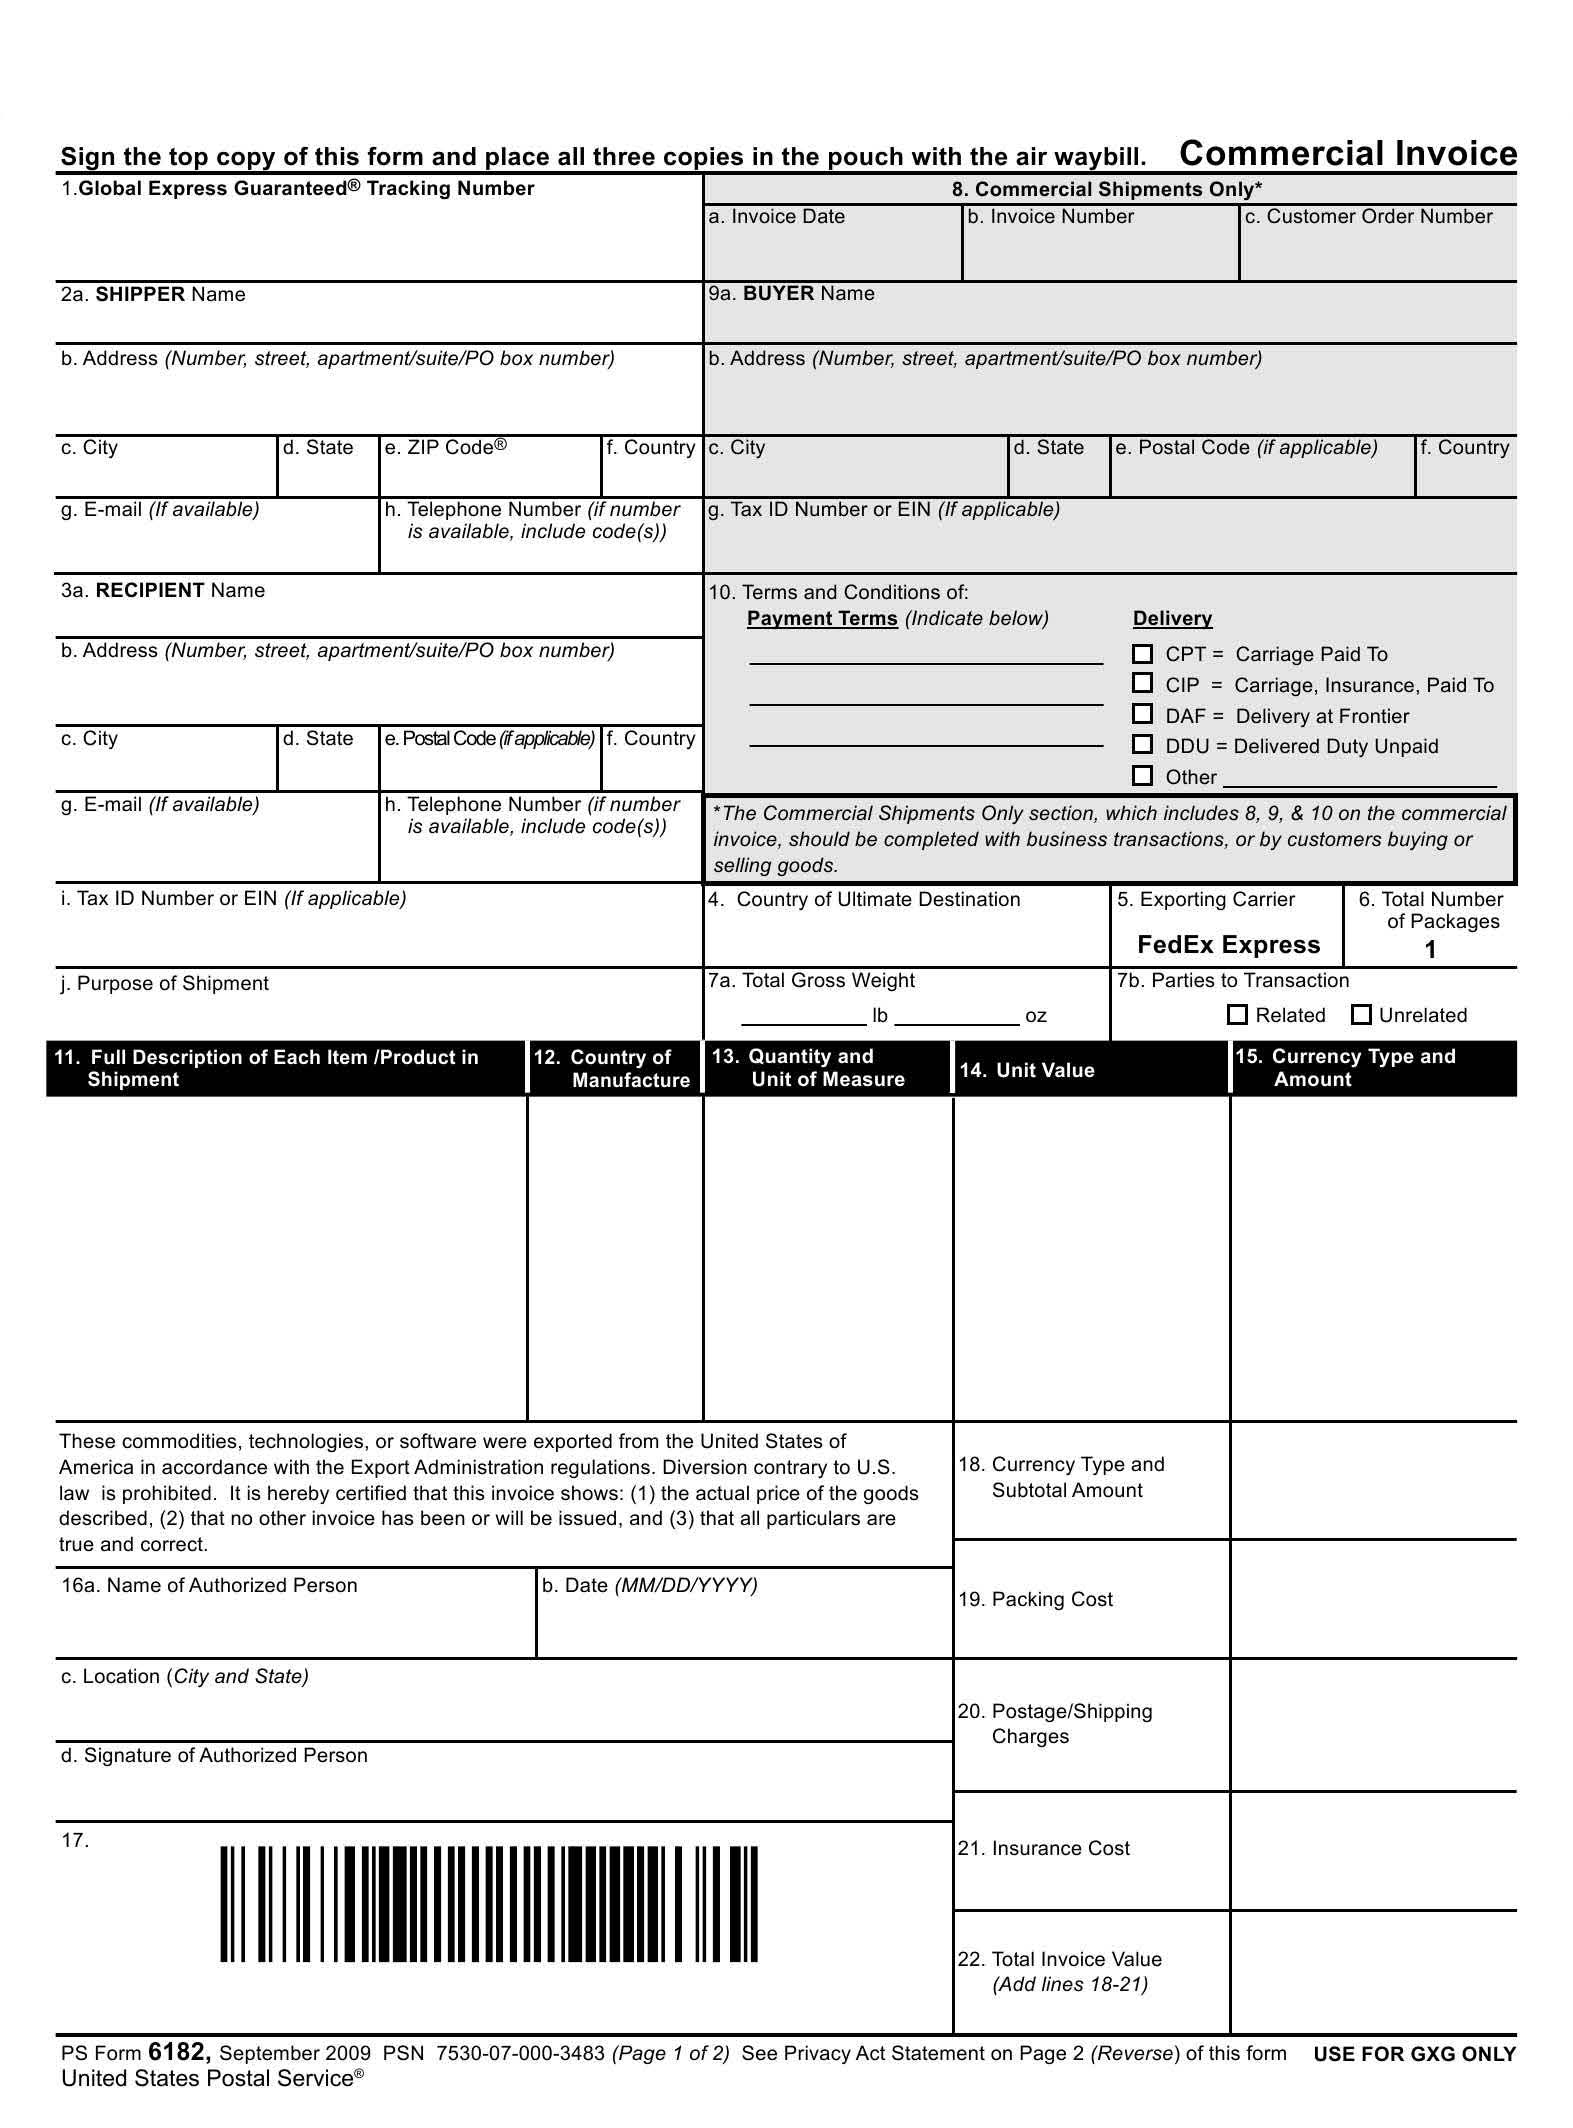 us customs invoice commercial invoice 1573 X 2128